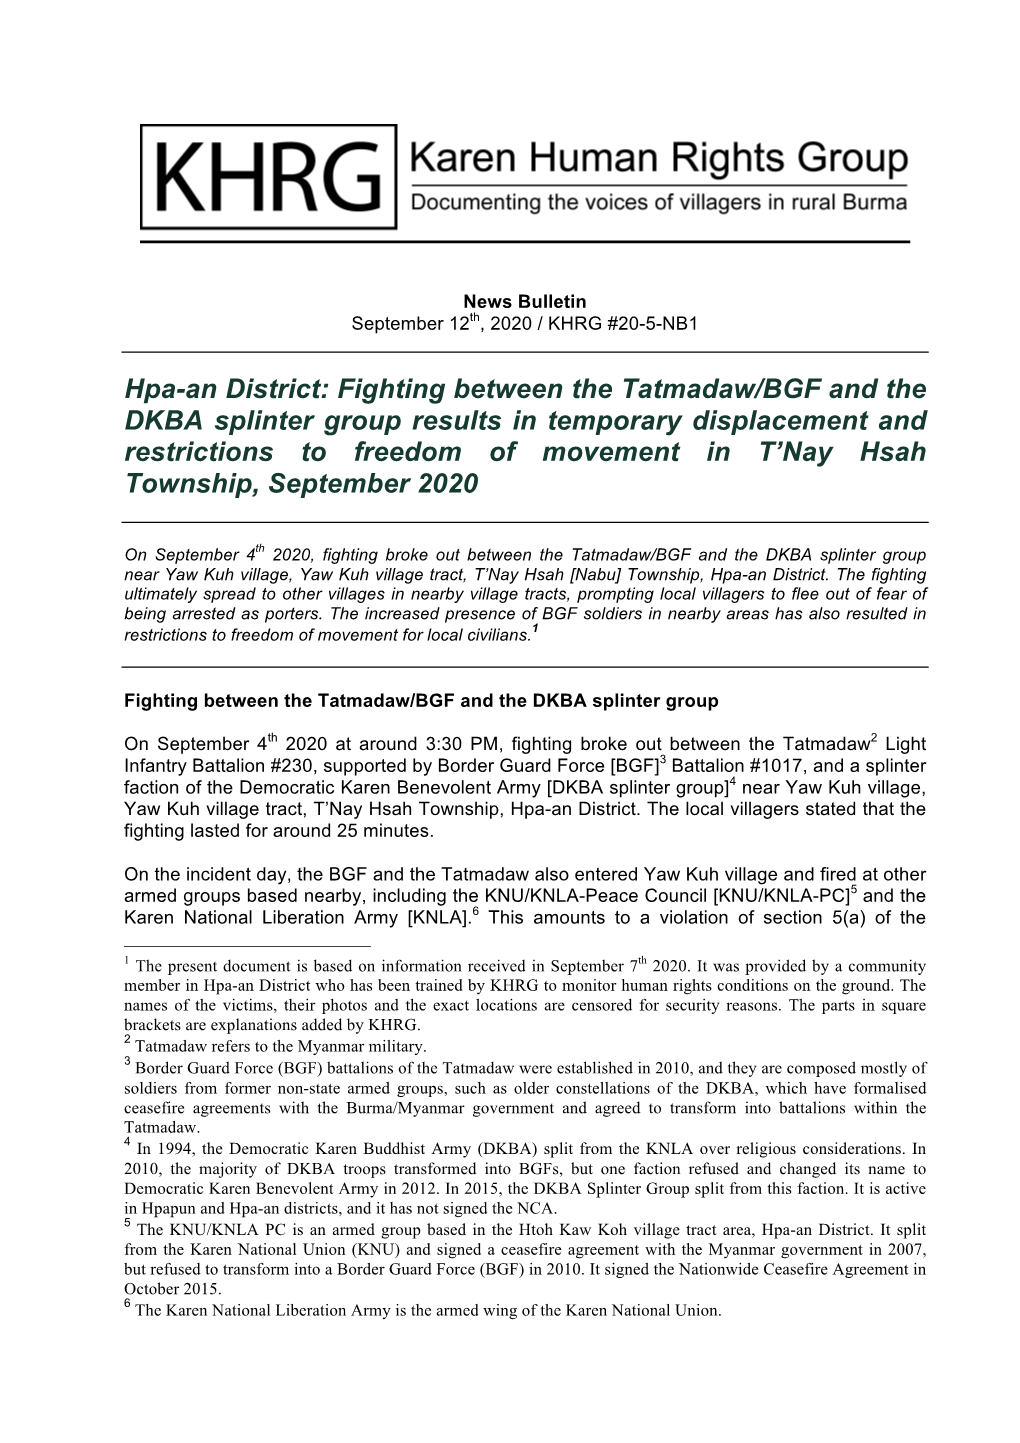 Hpa-An District: Fighting Between the Tatmadaw/BGF And